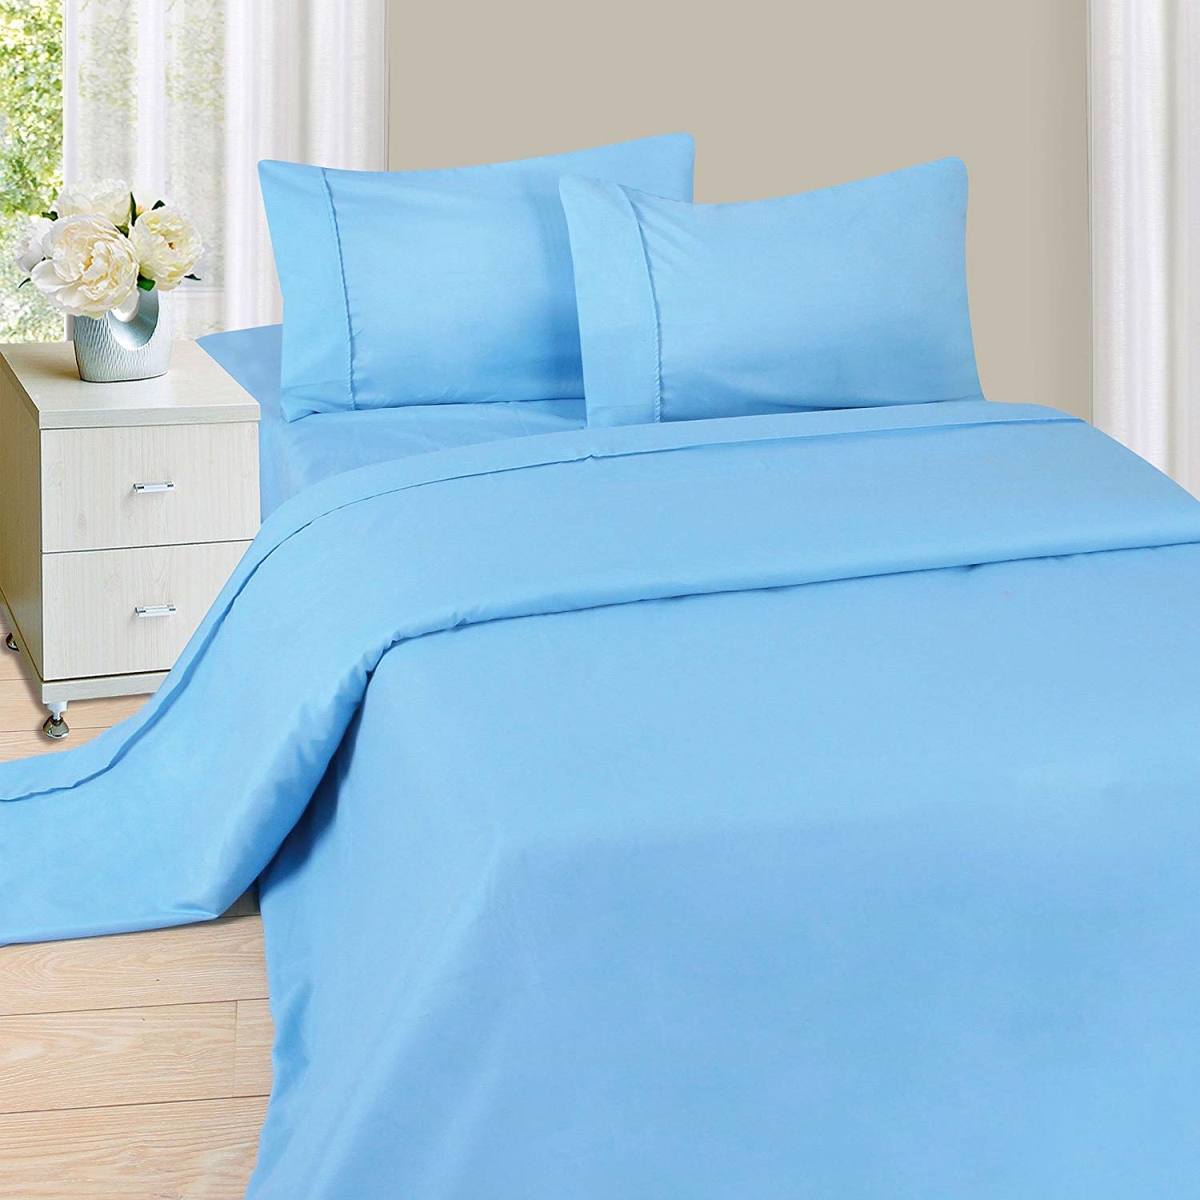 66a-05601 1200 Series 4 Piece Sheet Set, Twin Size & Extra Large - Blue